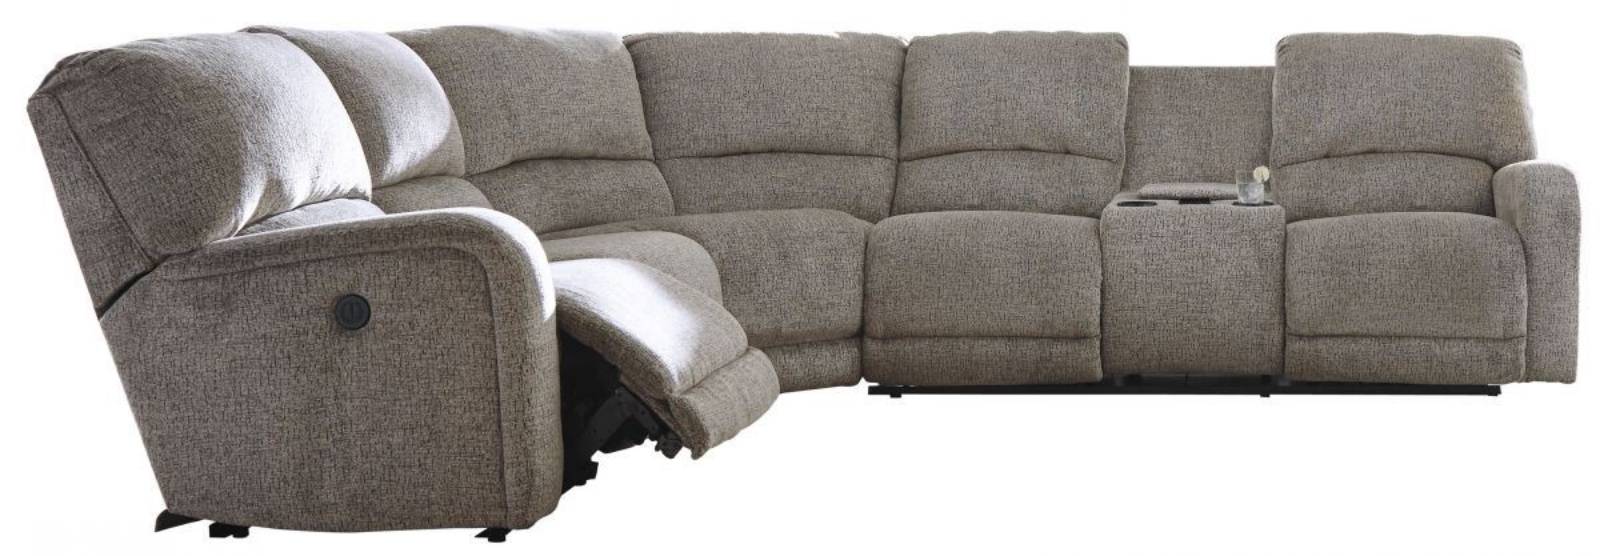 Picture of Pittsfield Sectional